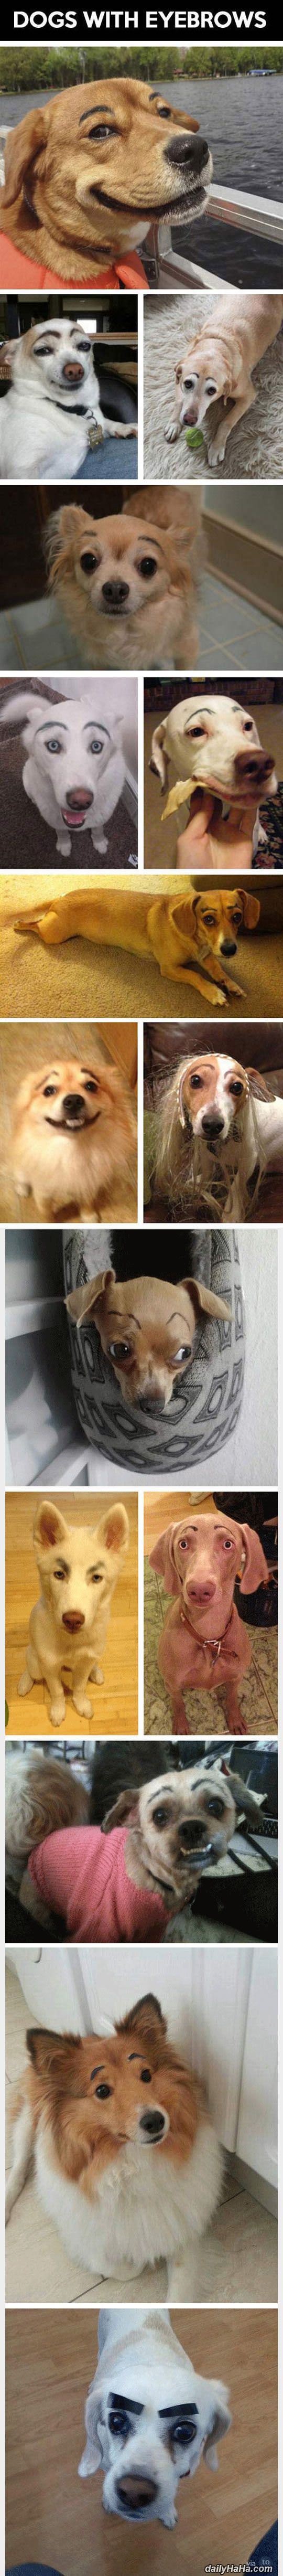 dogs with eyebrows funny picture